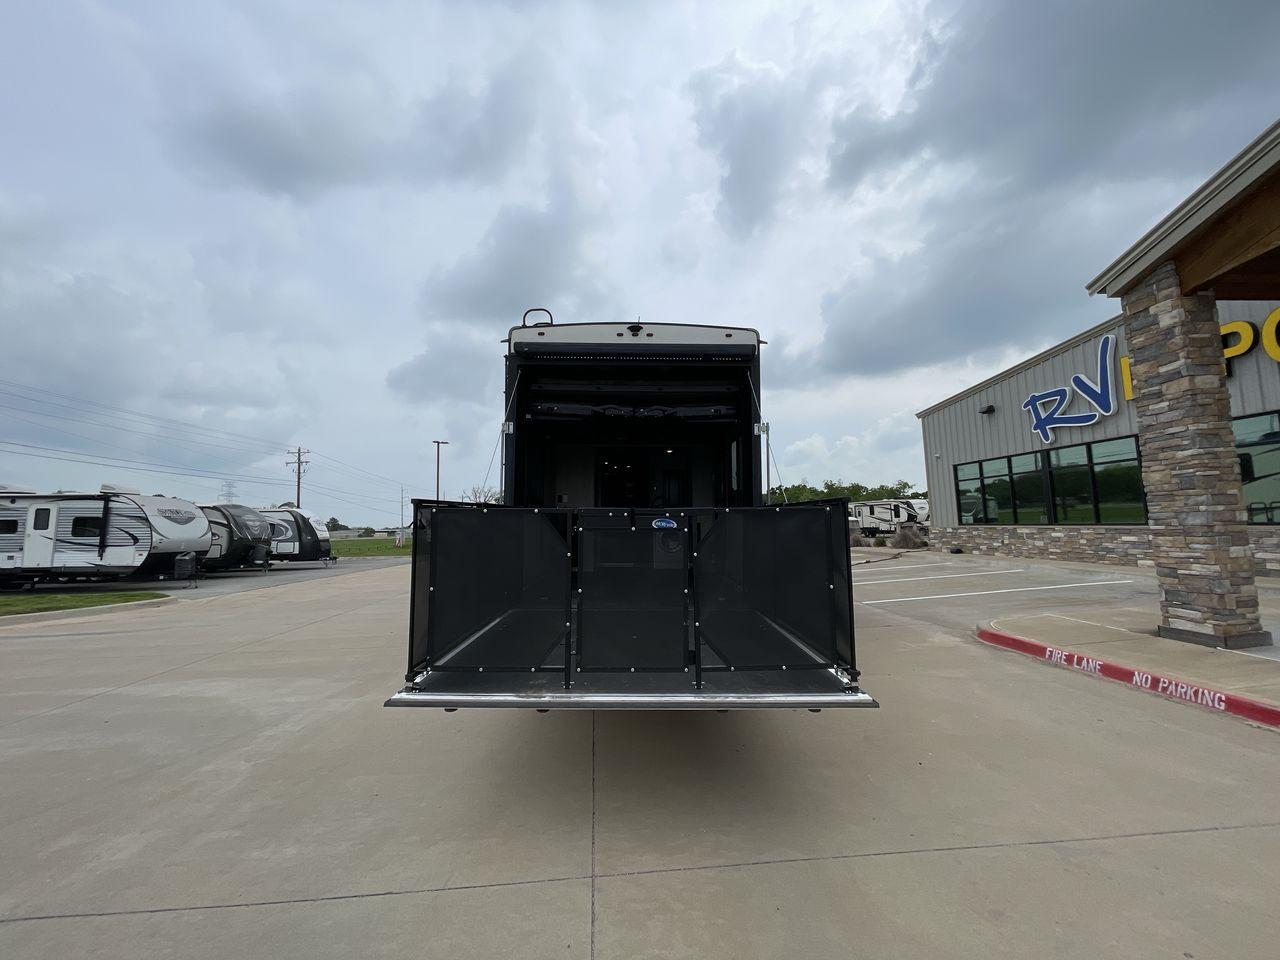 2019 HEARTLAND ROAD WARRIOR 427RW (5SFCG4435KE) , Length: 44.08 ft. | Dry Weight: 16,400 lbs. | Gross Weight: 20,000 lbs. | Slides: 2 transmission, located at 4319 N Main Street, Cleburne, TX, 76033, (817) 221-0660, 32.435829, -97.384178 - Photo #27